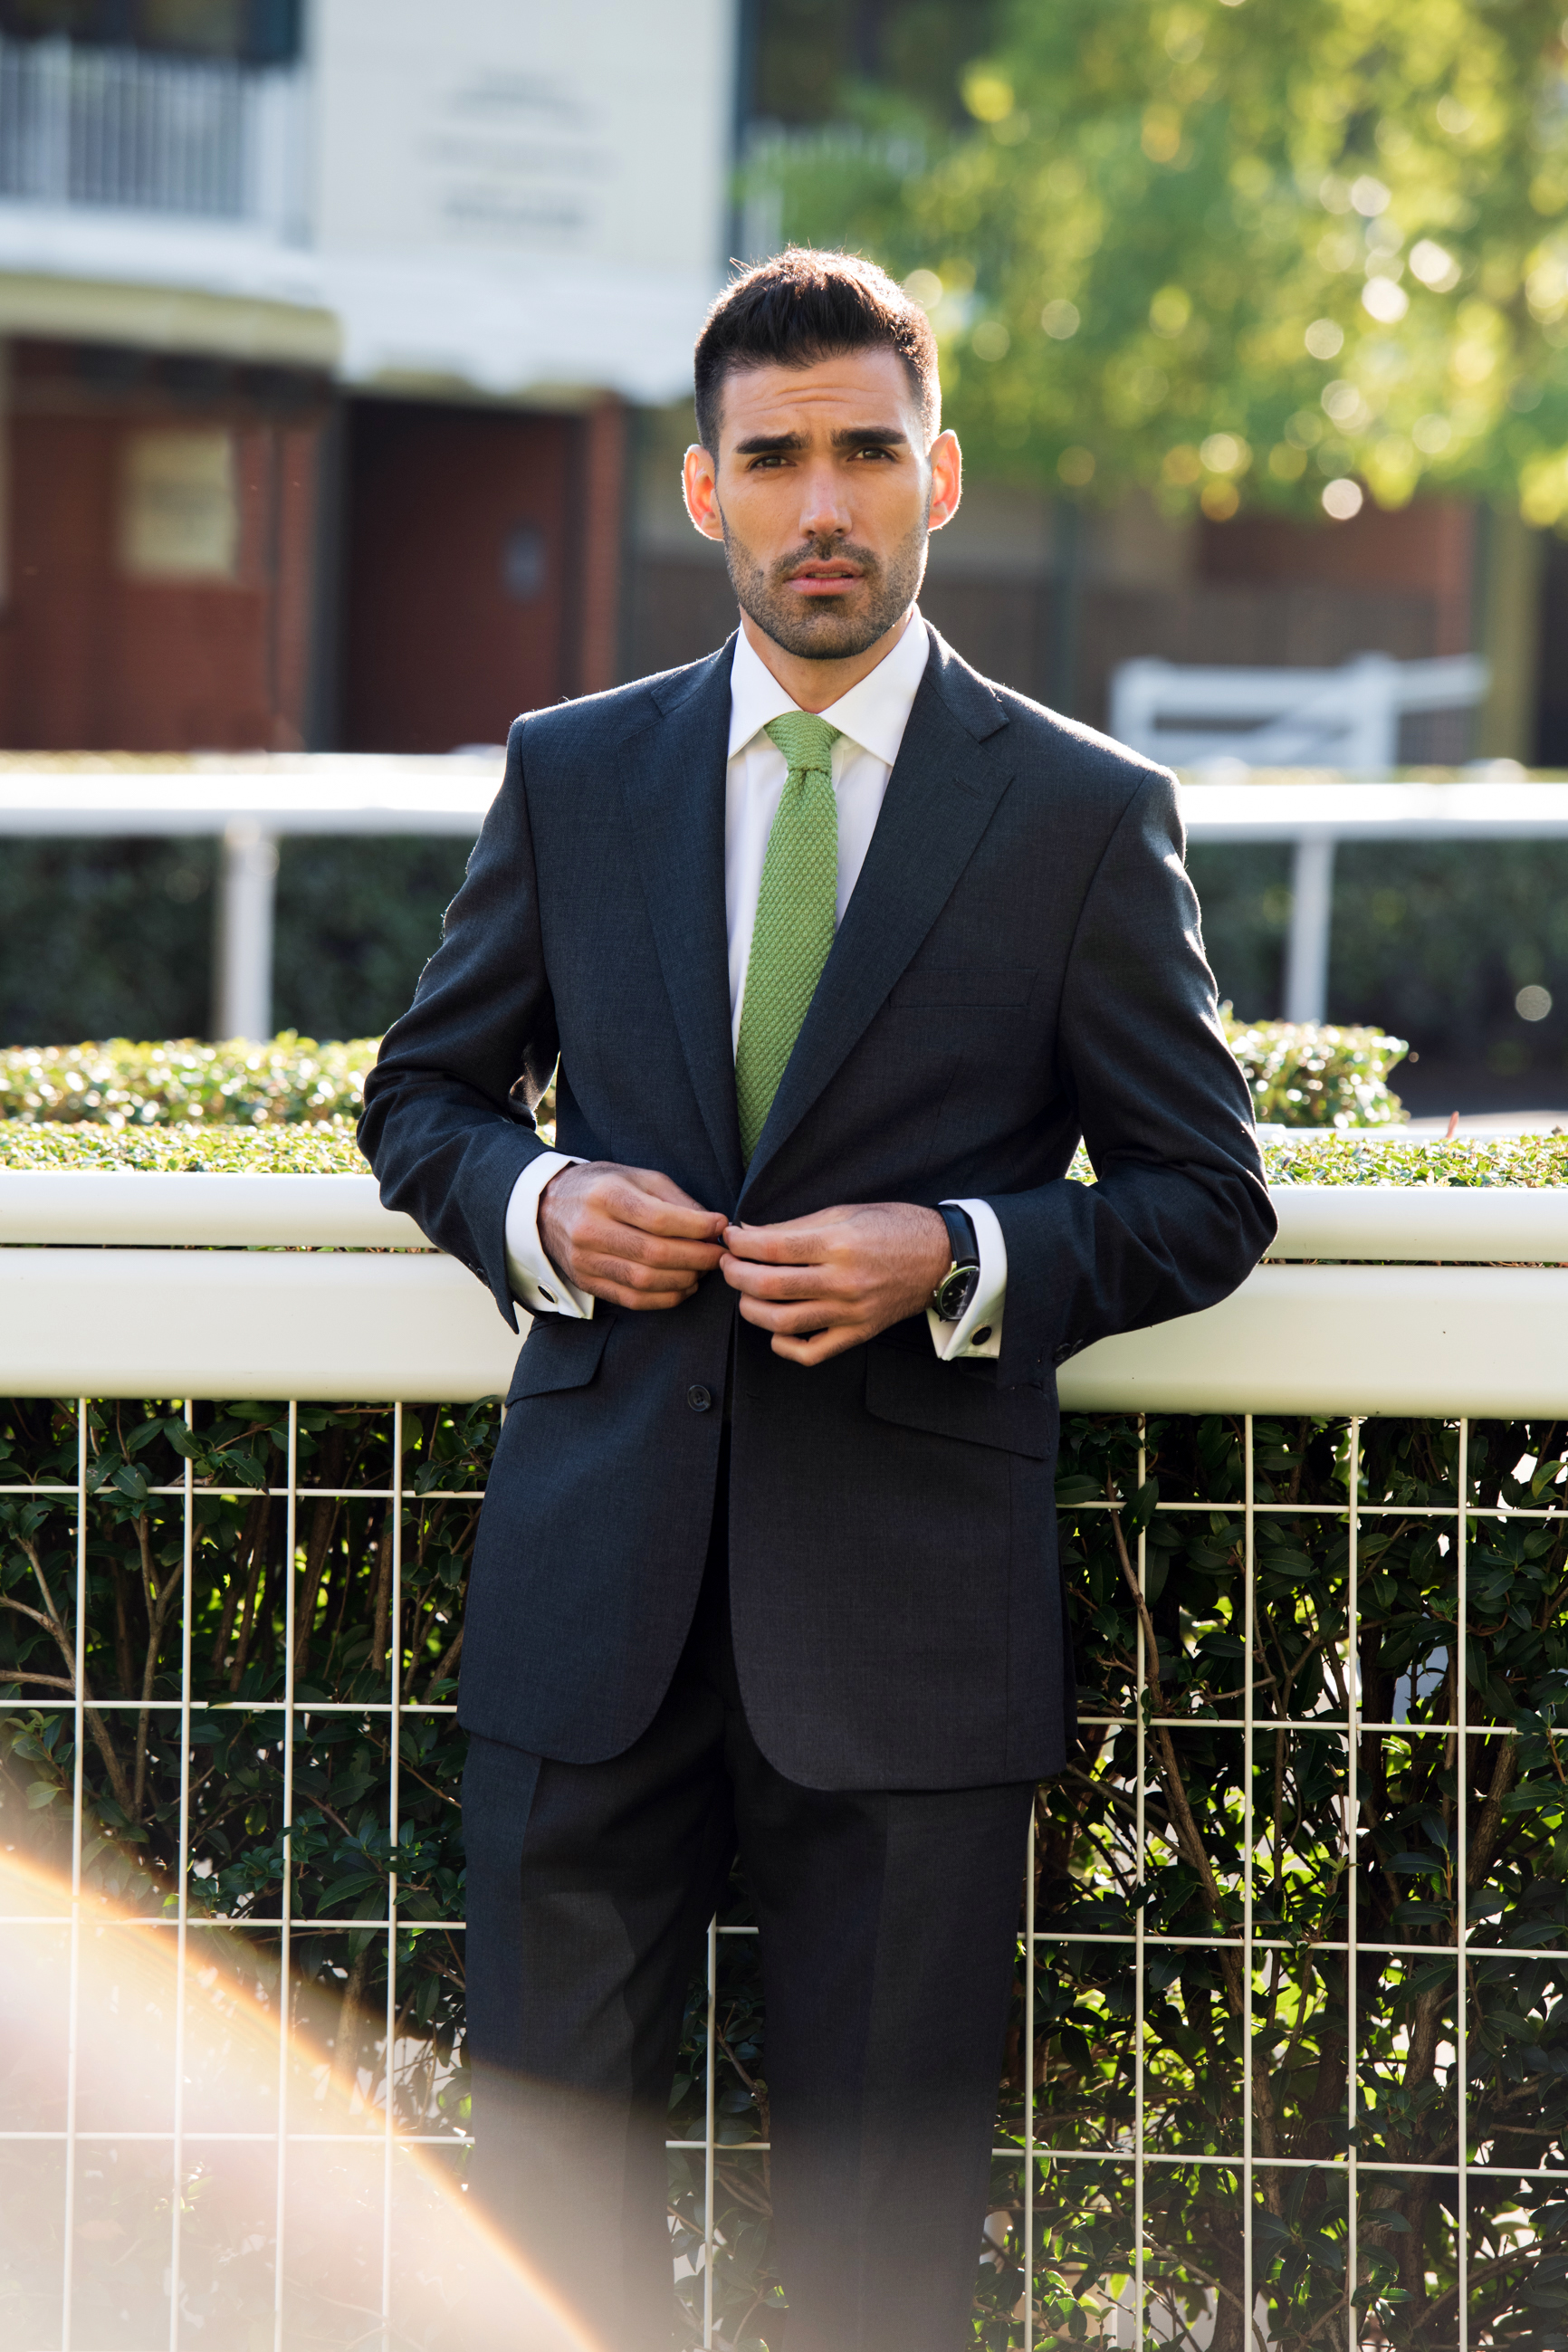 Men's Style At Ascot: What To Wear